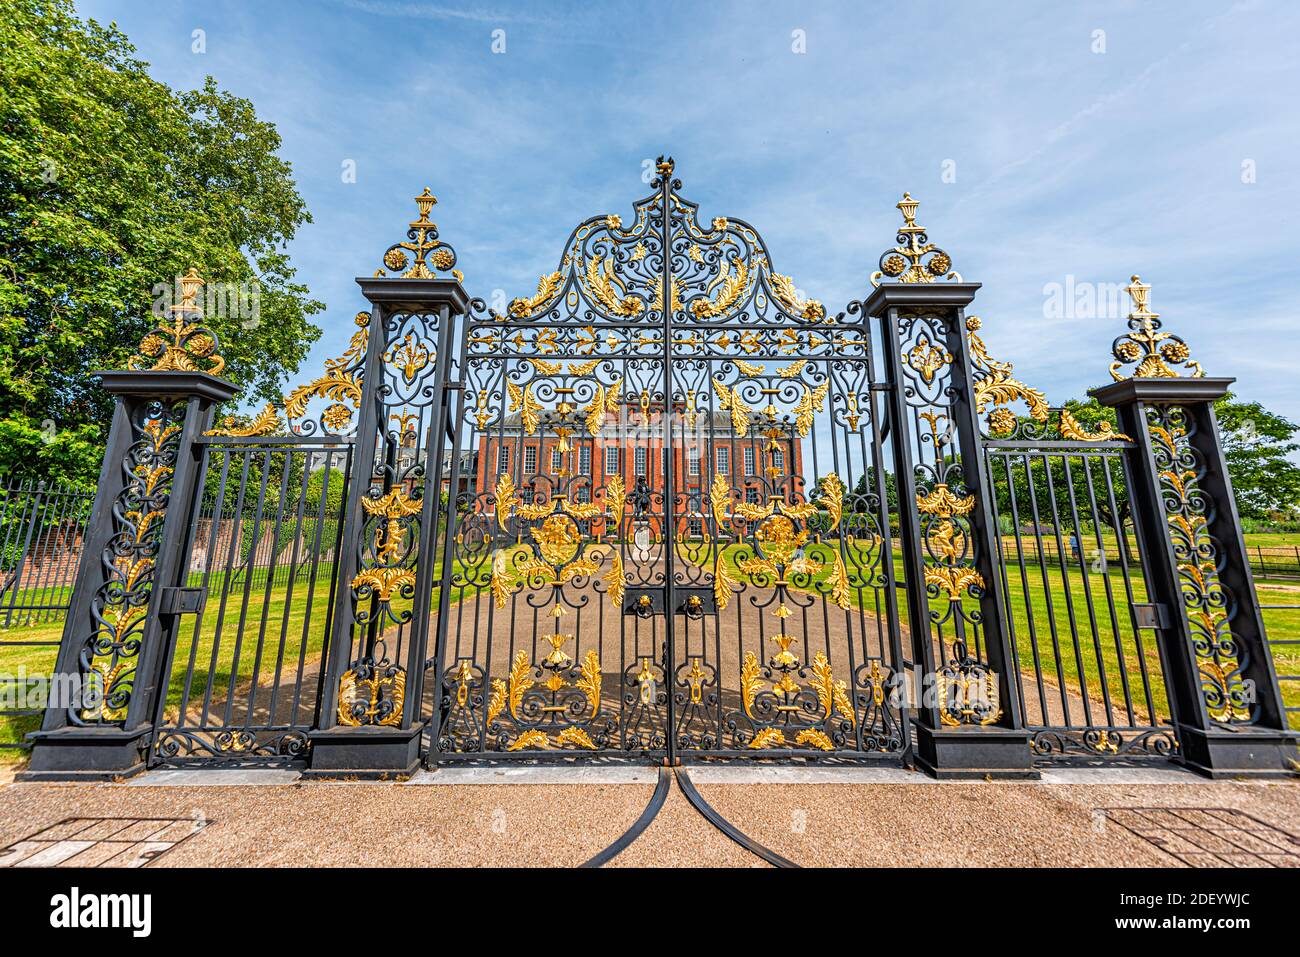 London, UK - June 24, 2018: Kensington Palace by gardens in Hyde park with closed bronze cast iron golden gold gate entrance in summer with blue sky i Stock Photo